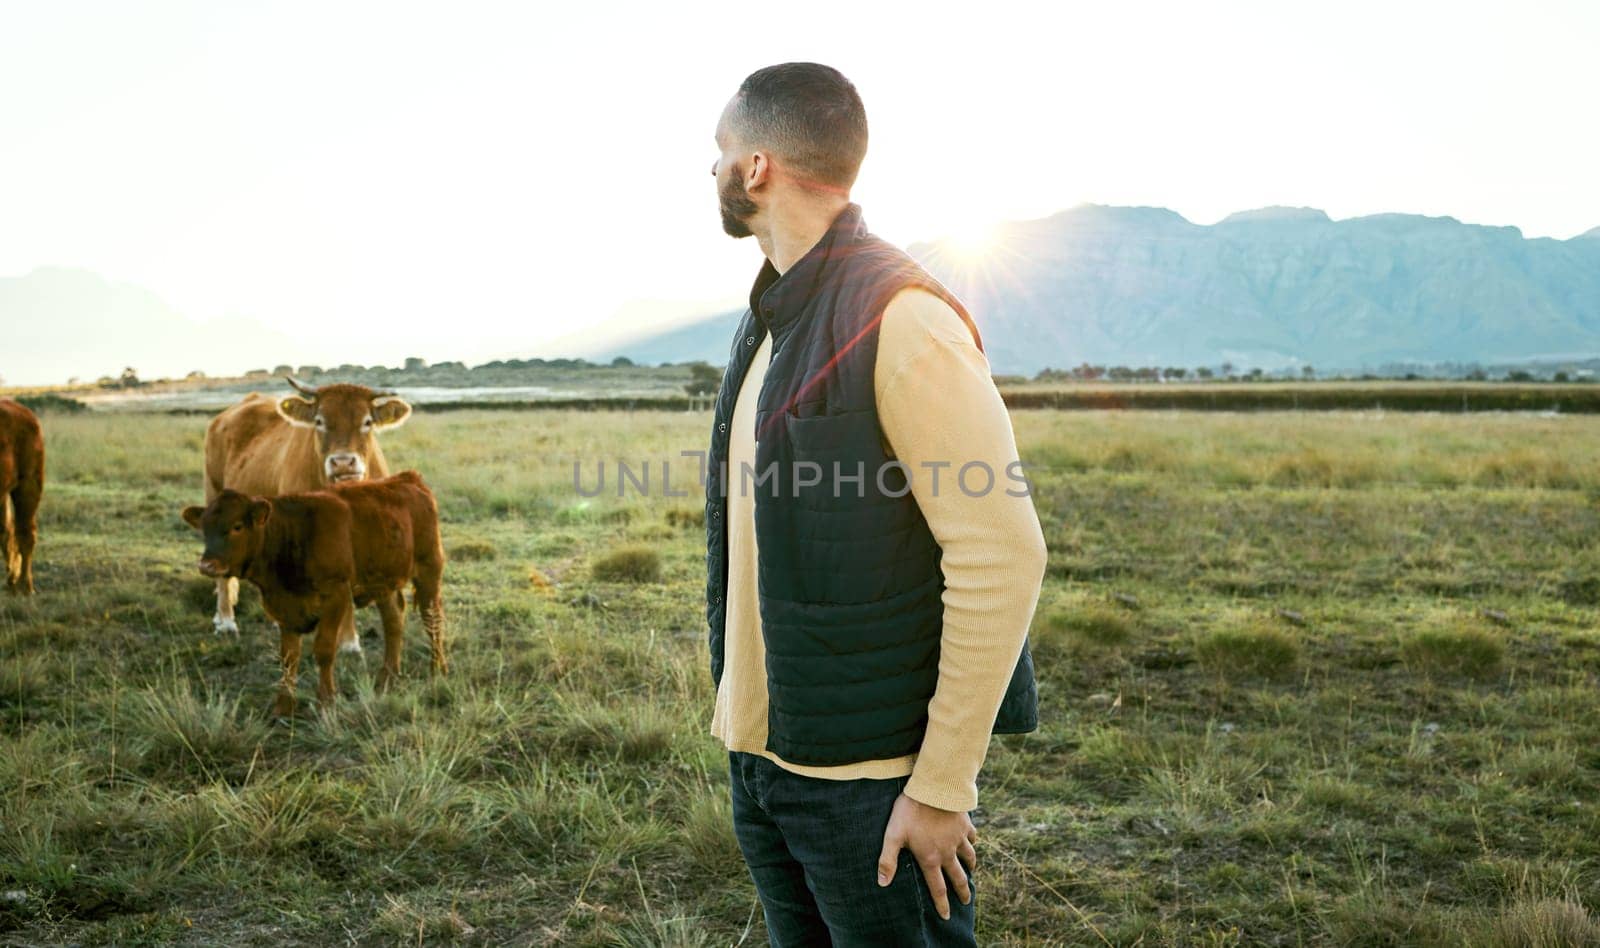 Cow field, morning farm and man looking at agriculture growth, free range animals or countryside sunrise view. Eco friendly sustainability, beef and farmer farming cattle livestock on green grass.